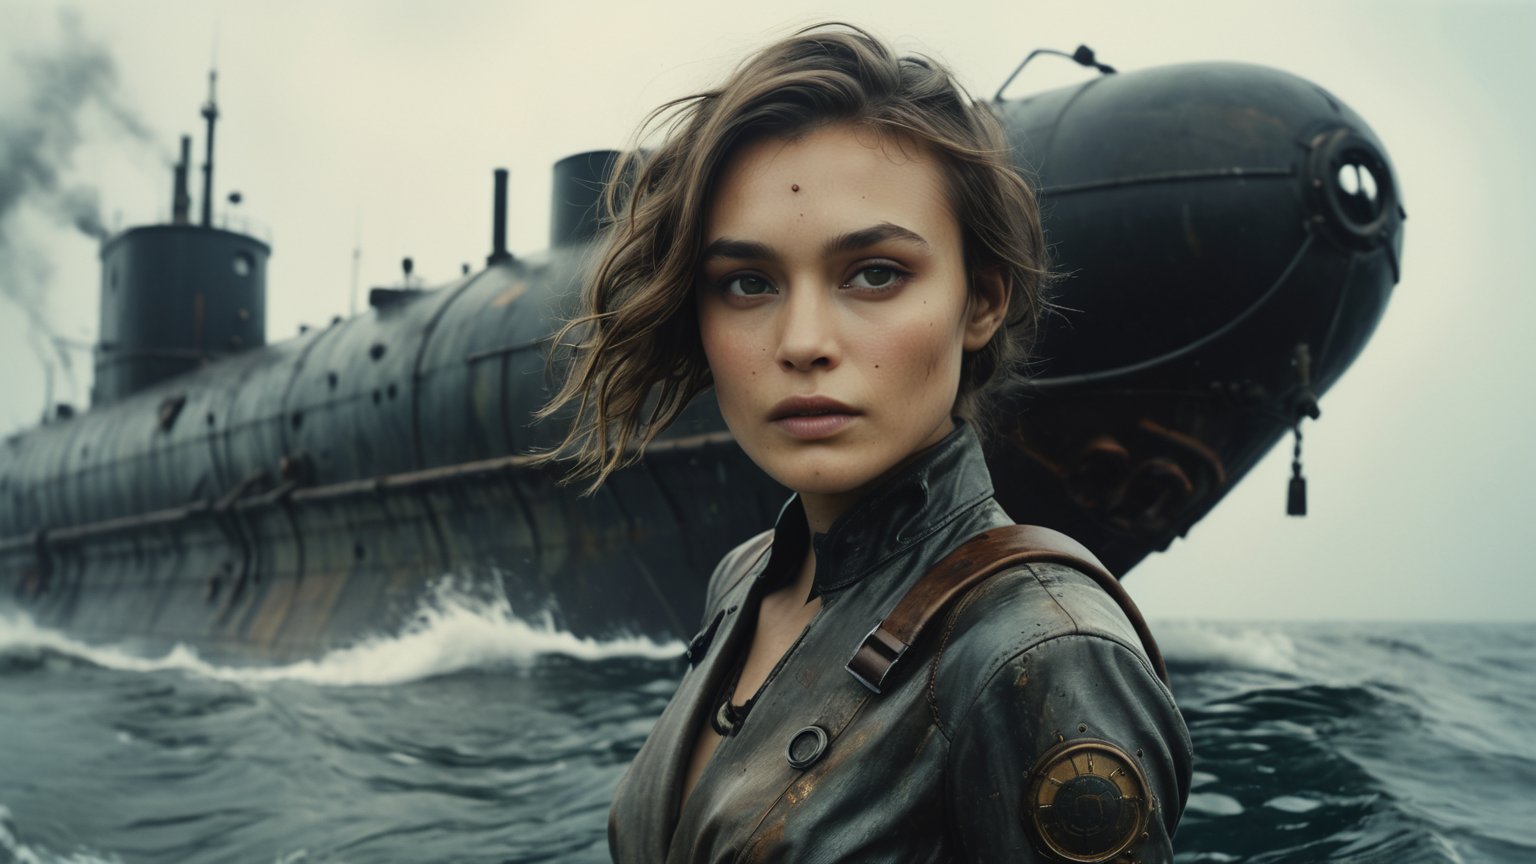 (((sexy cyberpunk android with mechanical parts Keira Knightley stands on the stern of huge atomic submarine))), ((there are anti-ship mines floating around)), ((vintage dystopian sea background)), ((lighting dust particles)), horror movie scene, best quality, masterpiece, (photorealistic:1.4), 8k uhd, dslr, masterpiece photoshoot, (in the style of Hans Heysen and Carne Griffiths),shot on Canon EOS 5D Mark IV DSLR, 85mm lens, long exposure time, f/8, ISO 100, shutter speed 1/125, award winning photograph, facing camera, perfect contrast,cinematic style